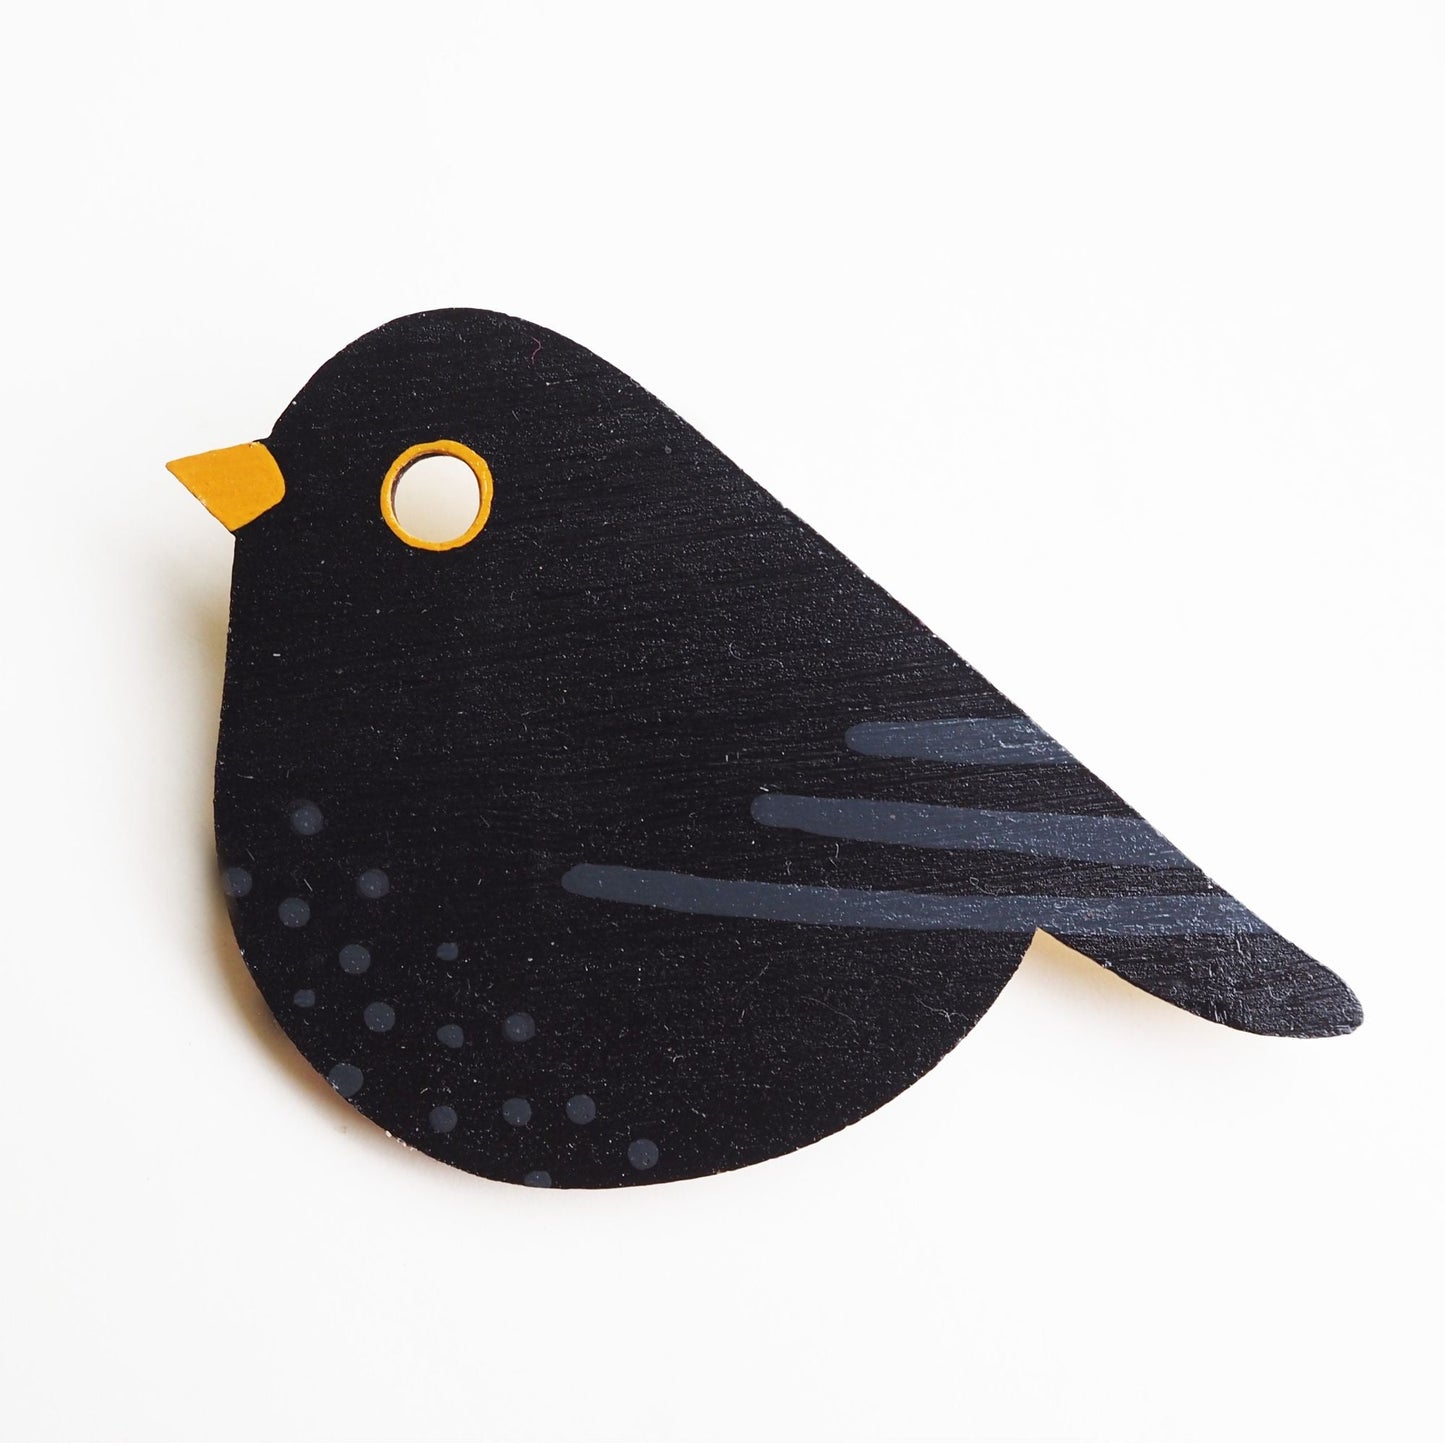 Painted blackbird brooch against a white background.